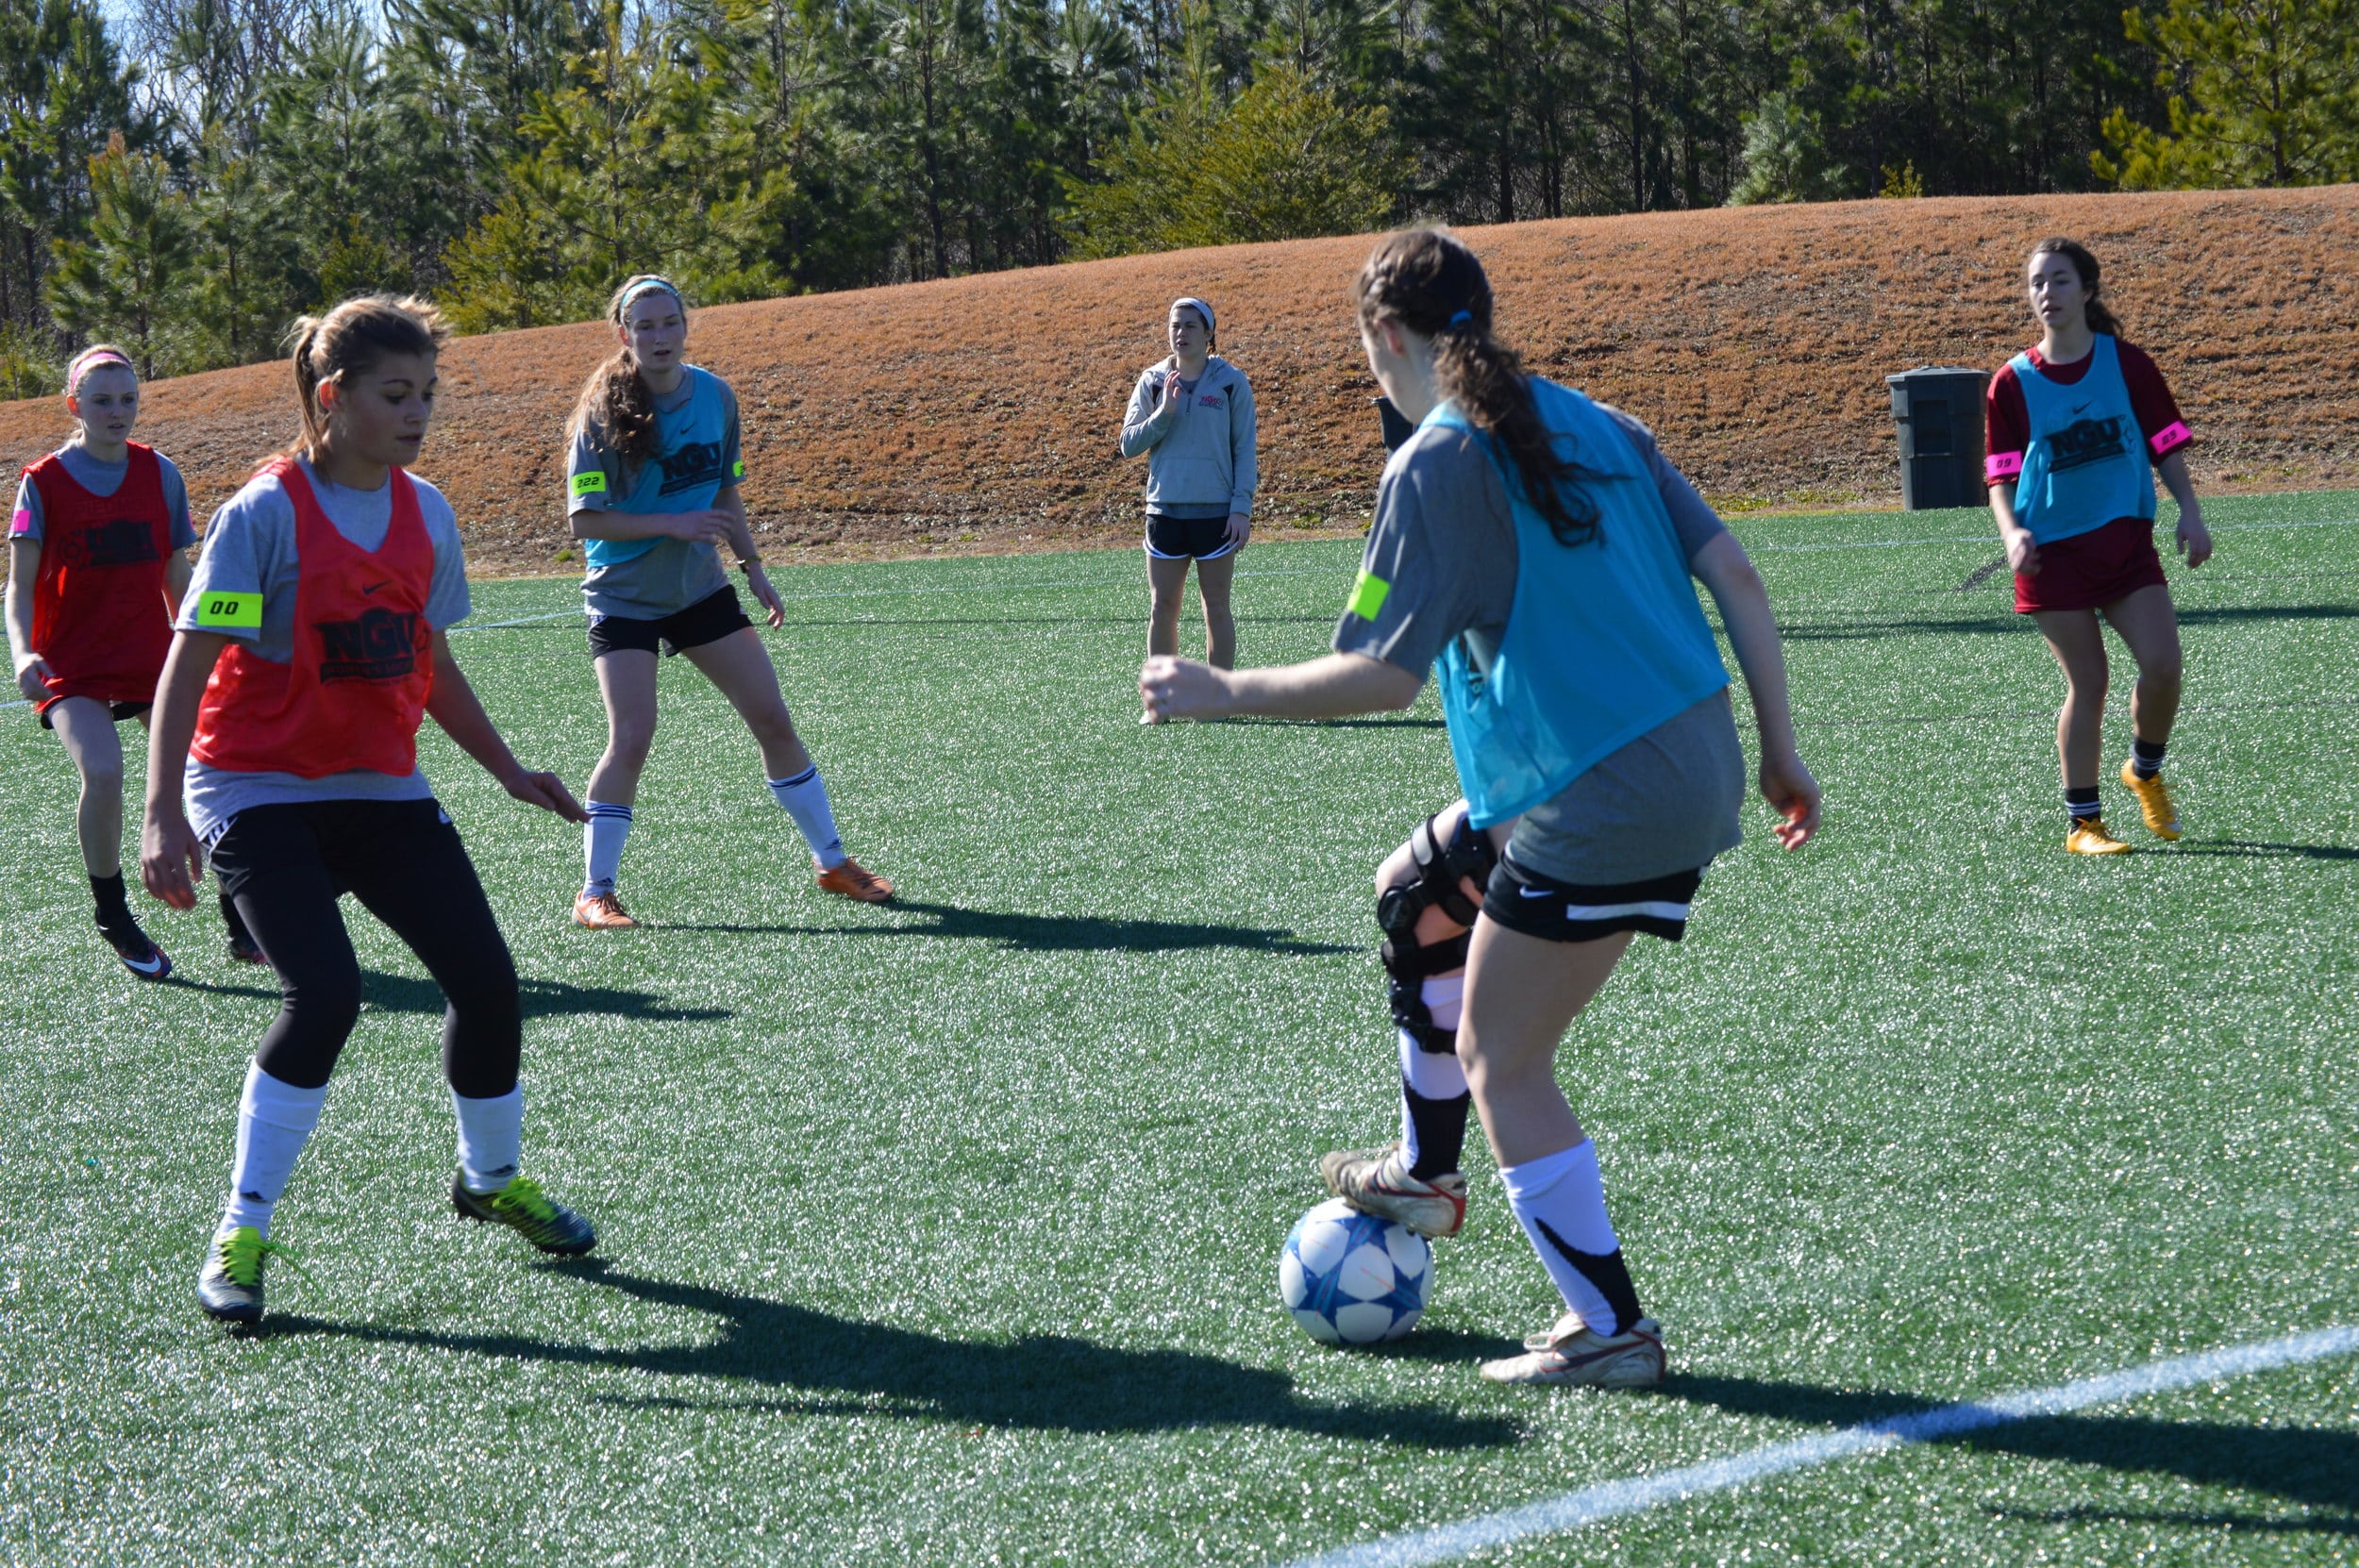 The main goal for the student with the ball was to find a way to score for her team.